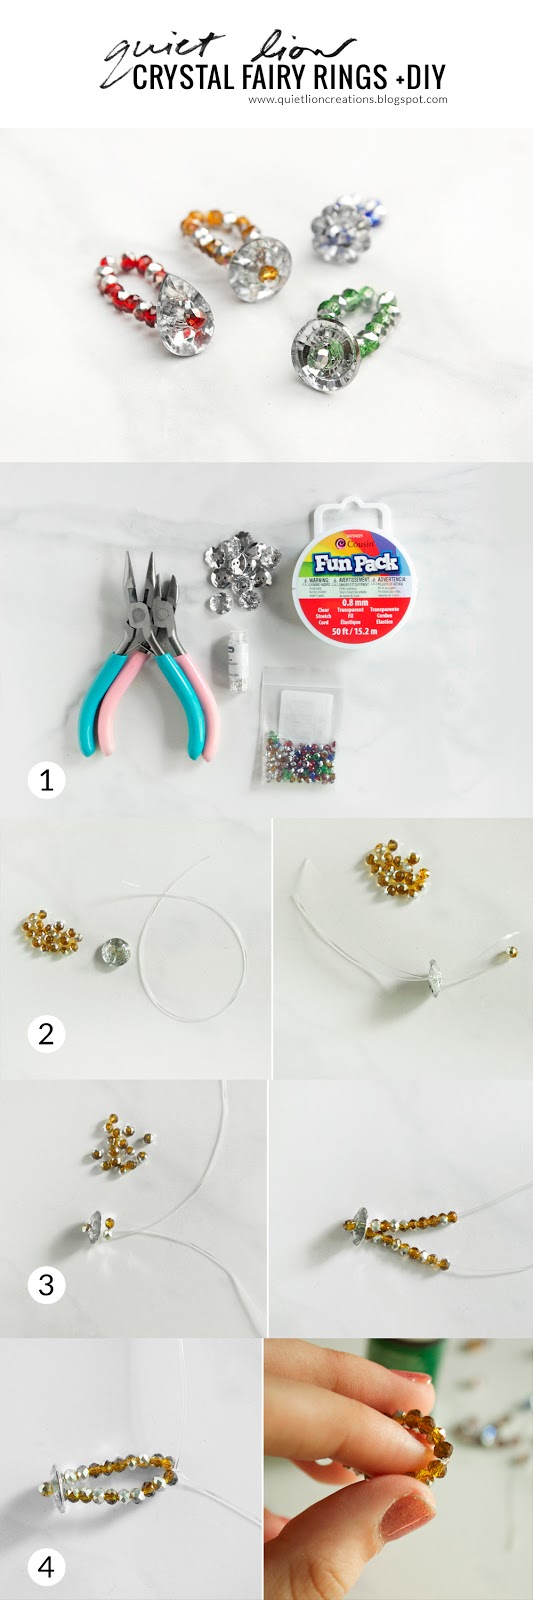 crystal fairy rings +diy – Quiet Lion Creations